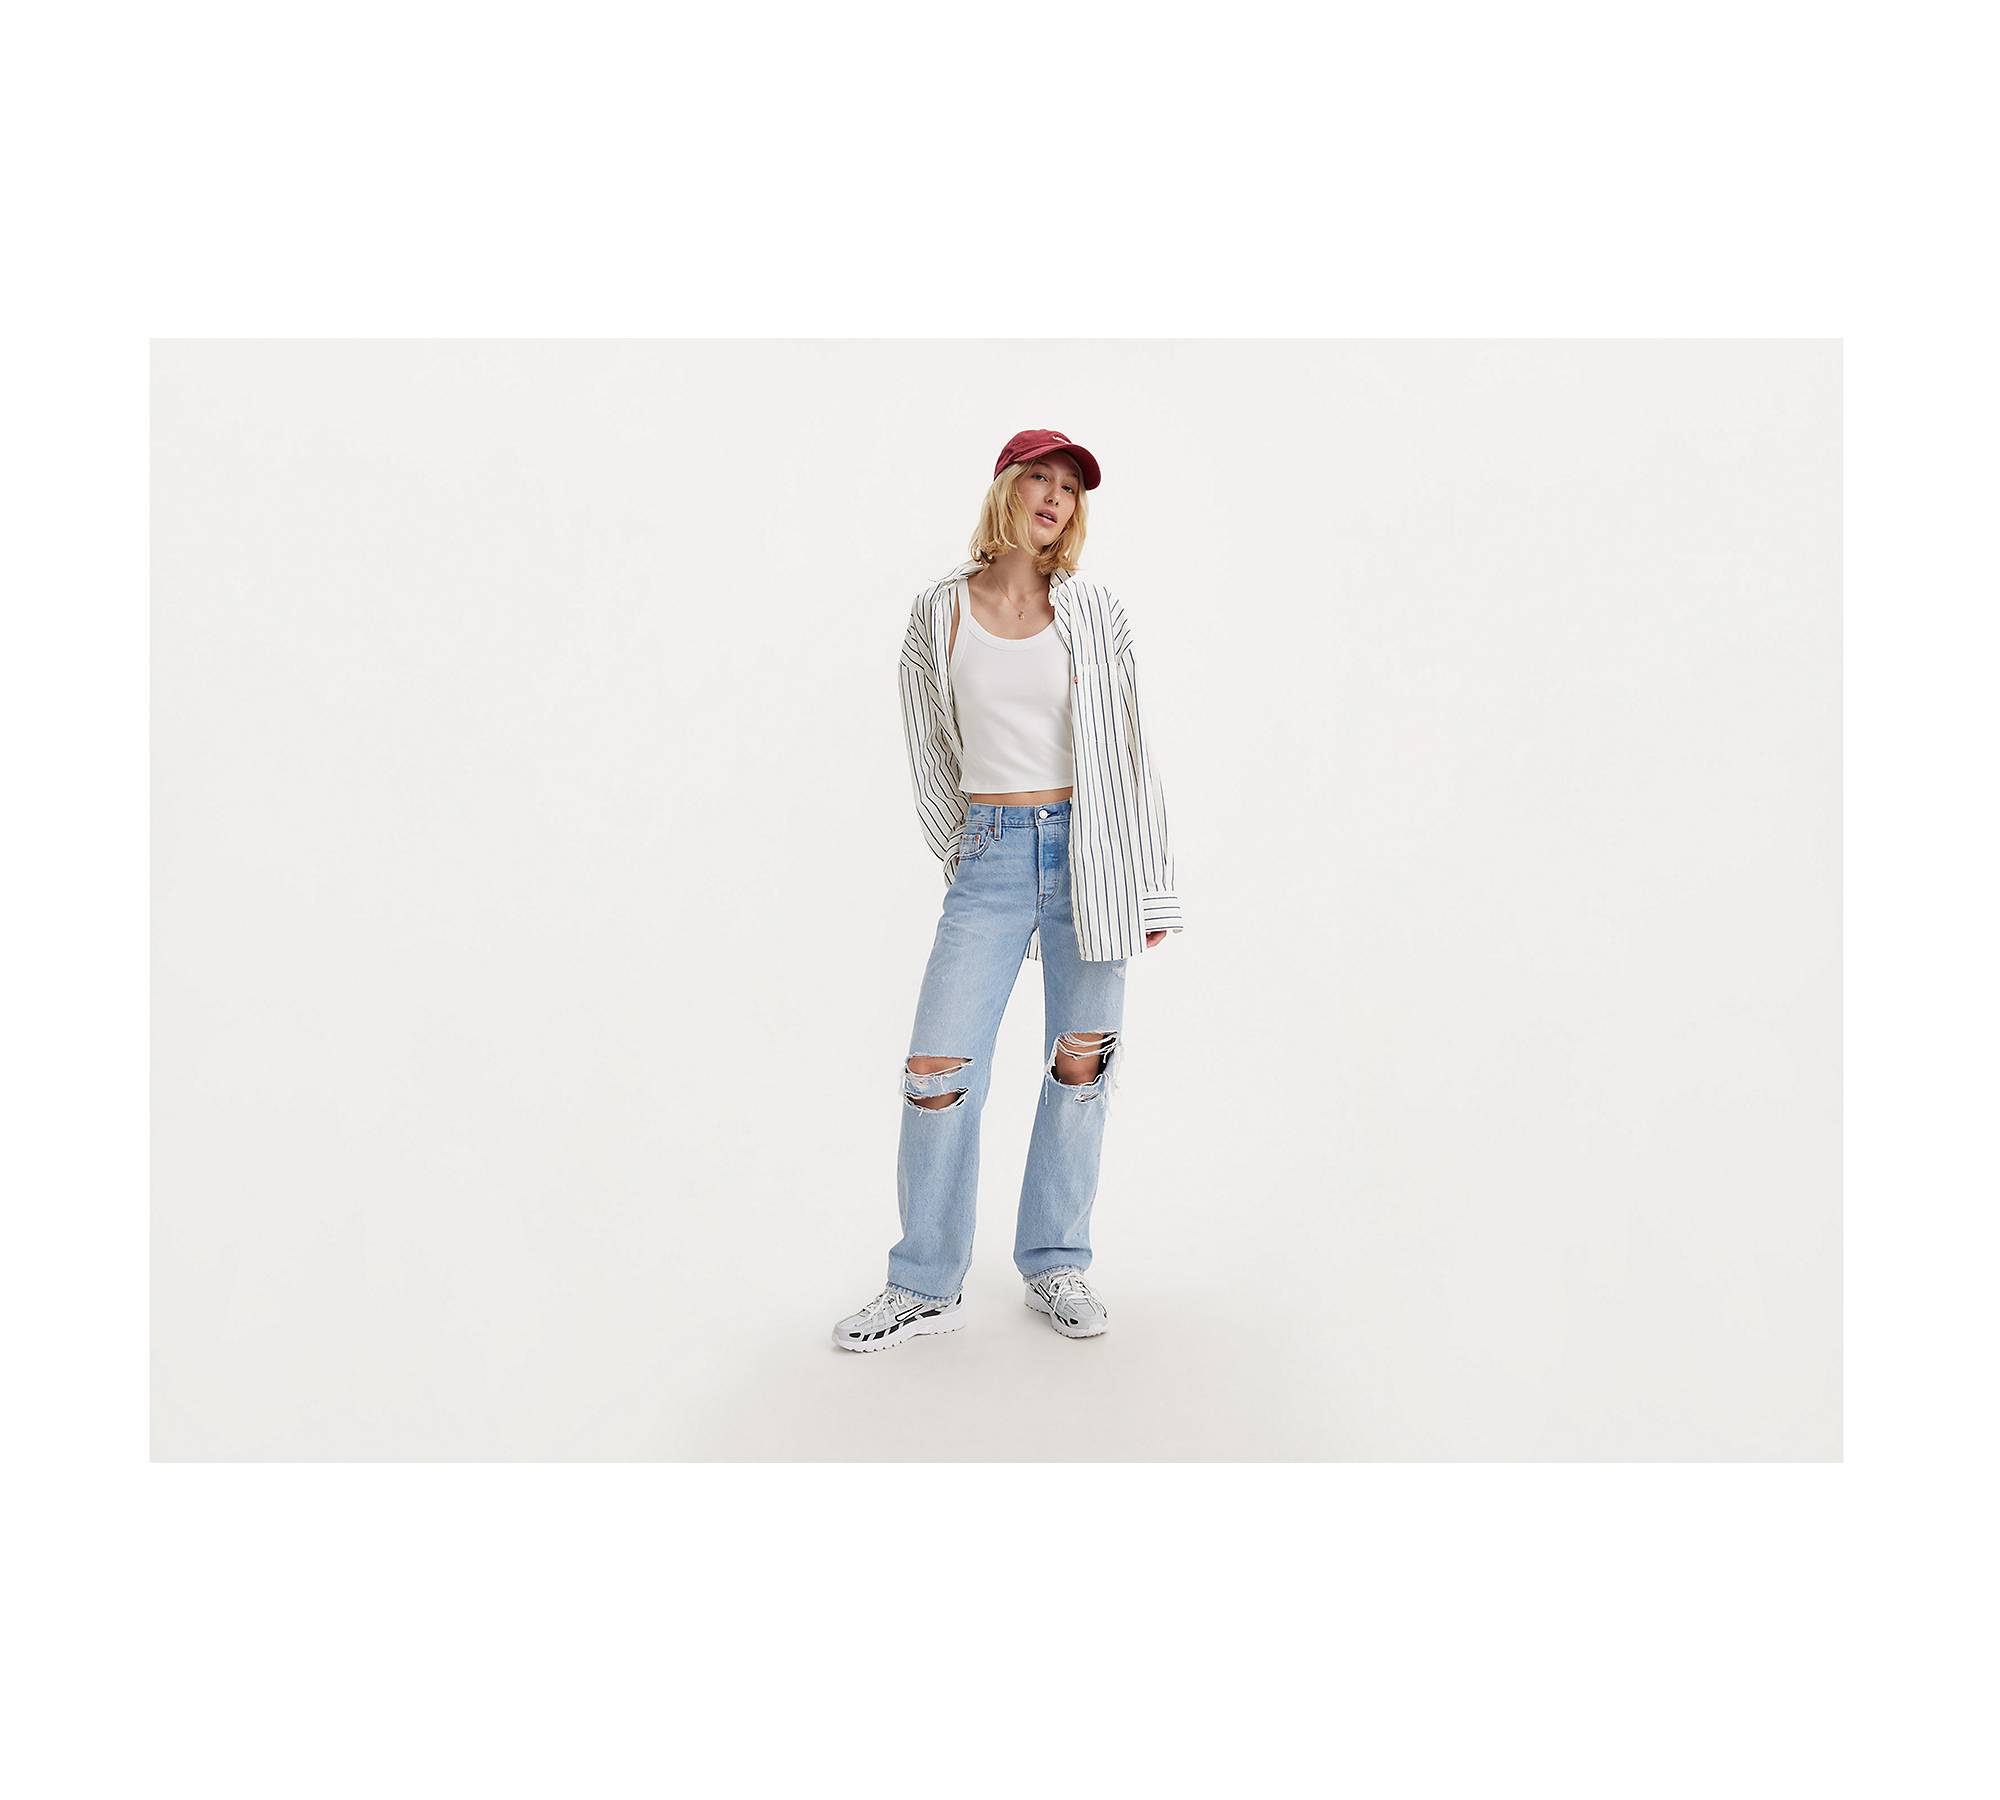 Women's Jeans, Skinny, Flared & Baggy 90's Style Jeans